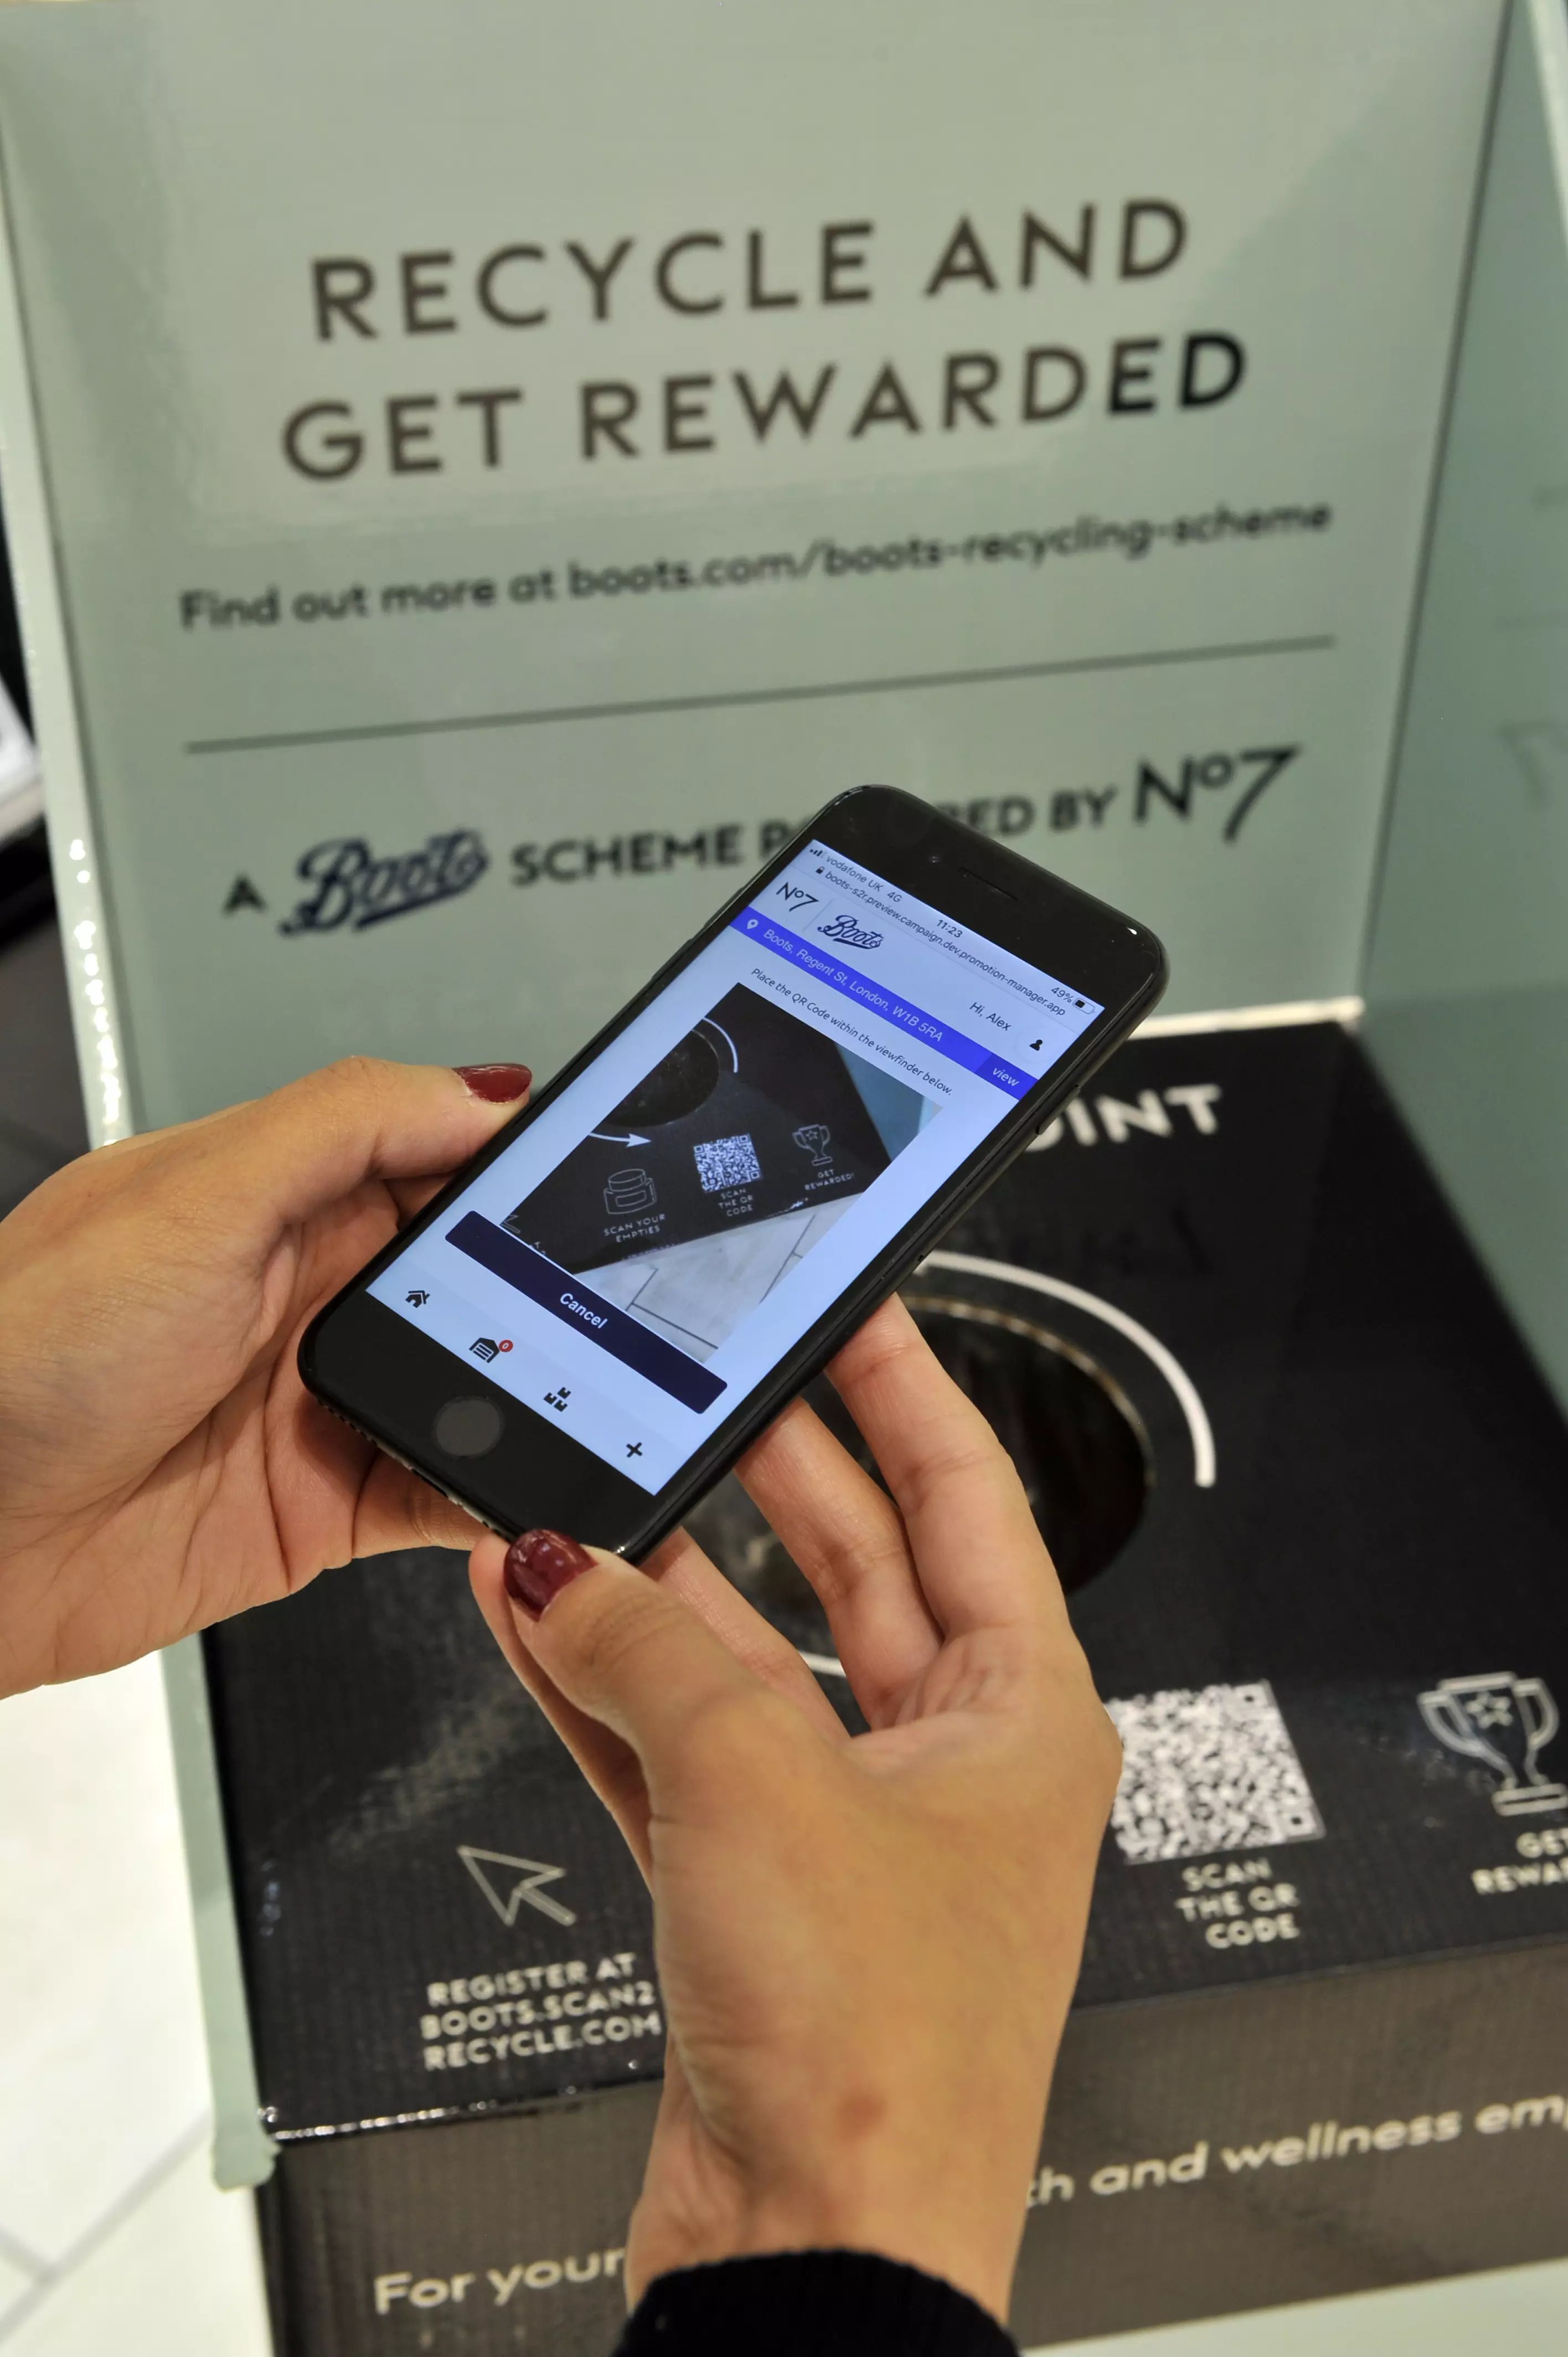 You can scan your products at home before dropping them off (